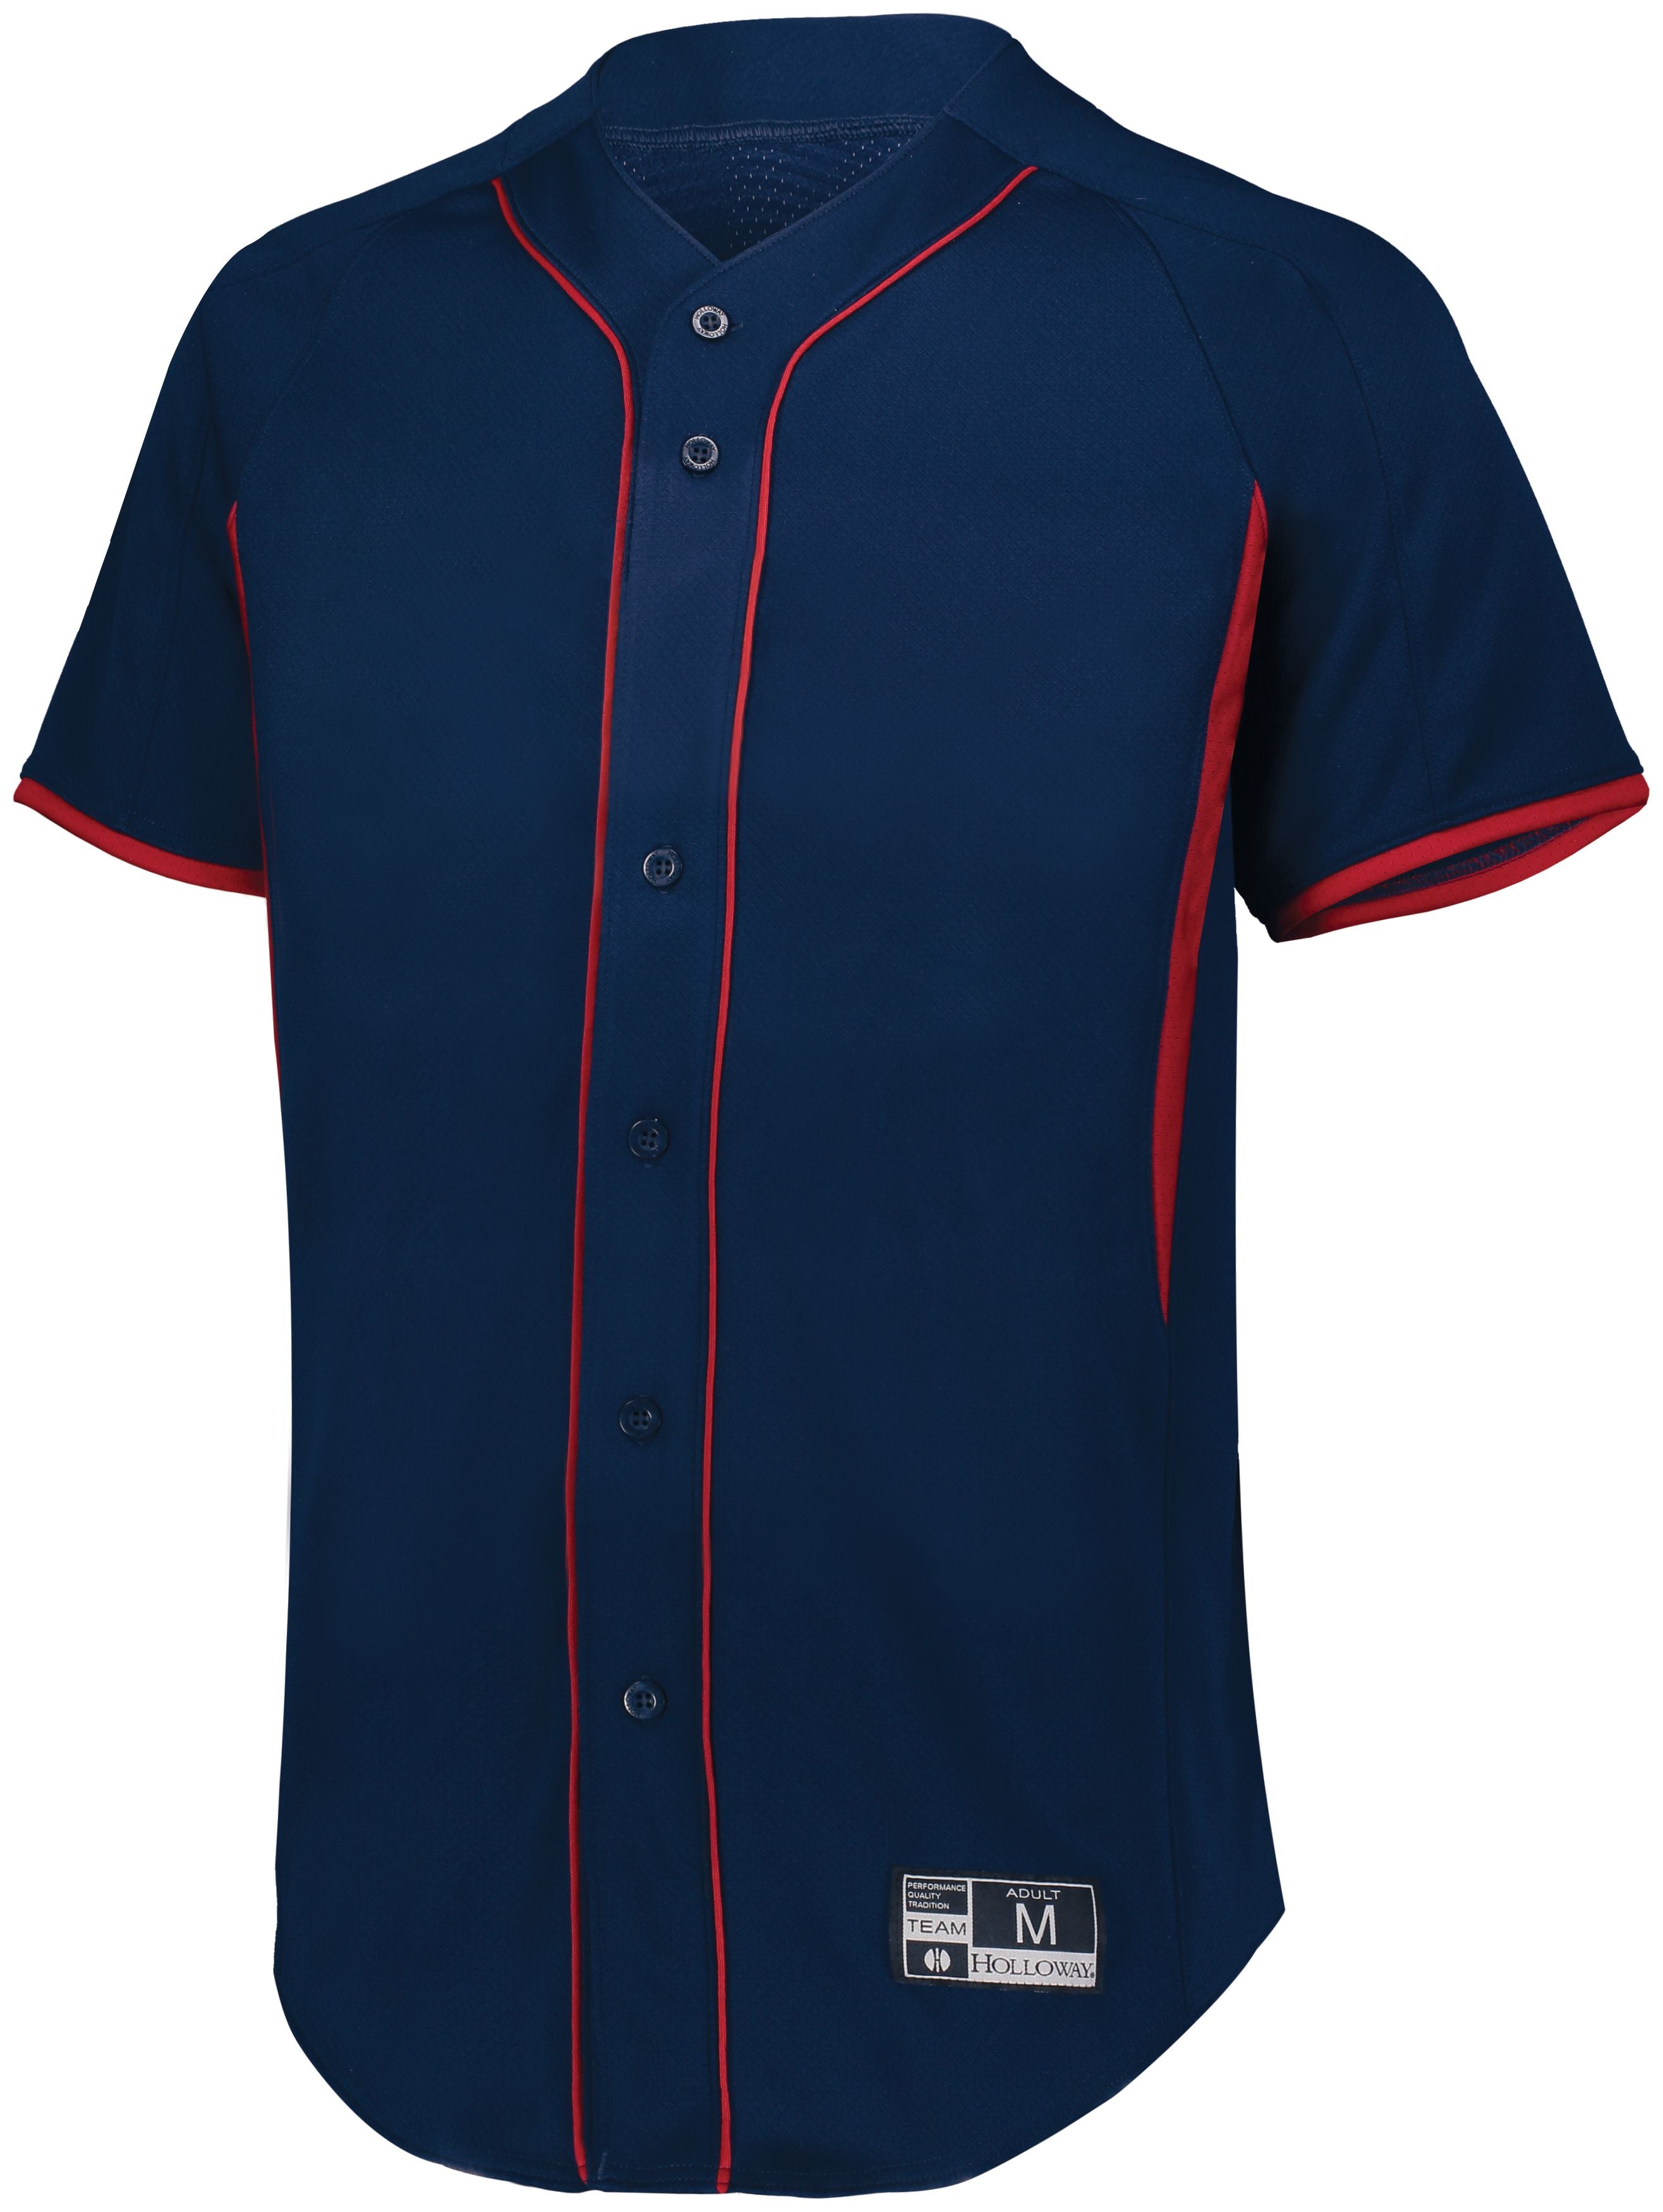 Holloway Youth  Game7 Full-Button Baseball Jersey in Navy/Scarlet  -Part of the Youth, Youth-Jersey, Baseball, Holloway, Shirts, All-Sports, All-Sports-1 product lines at KanaleyCreations.com